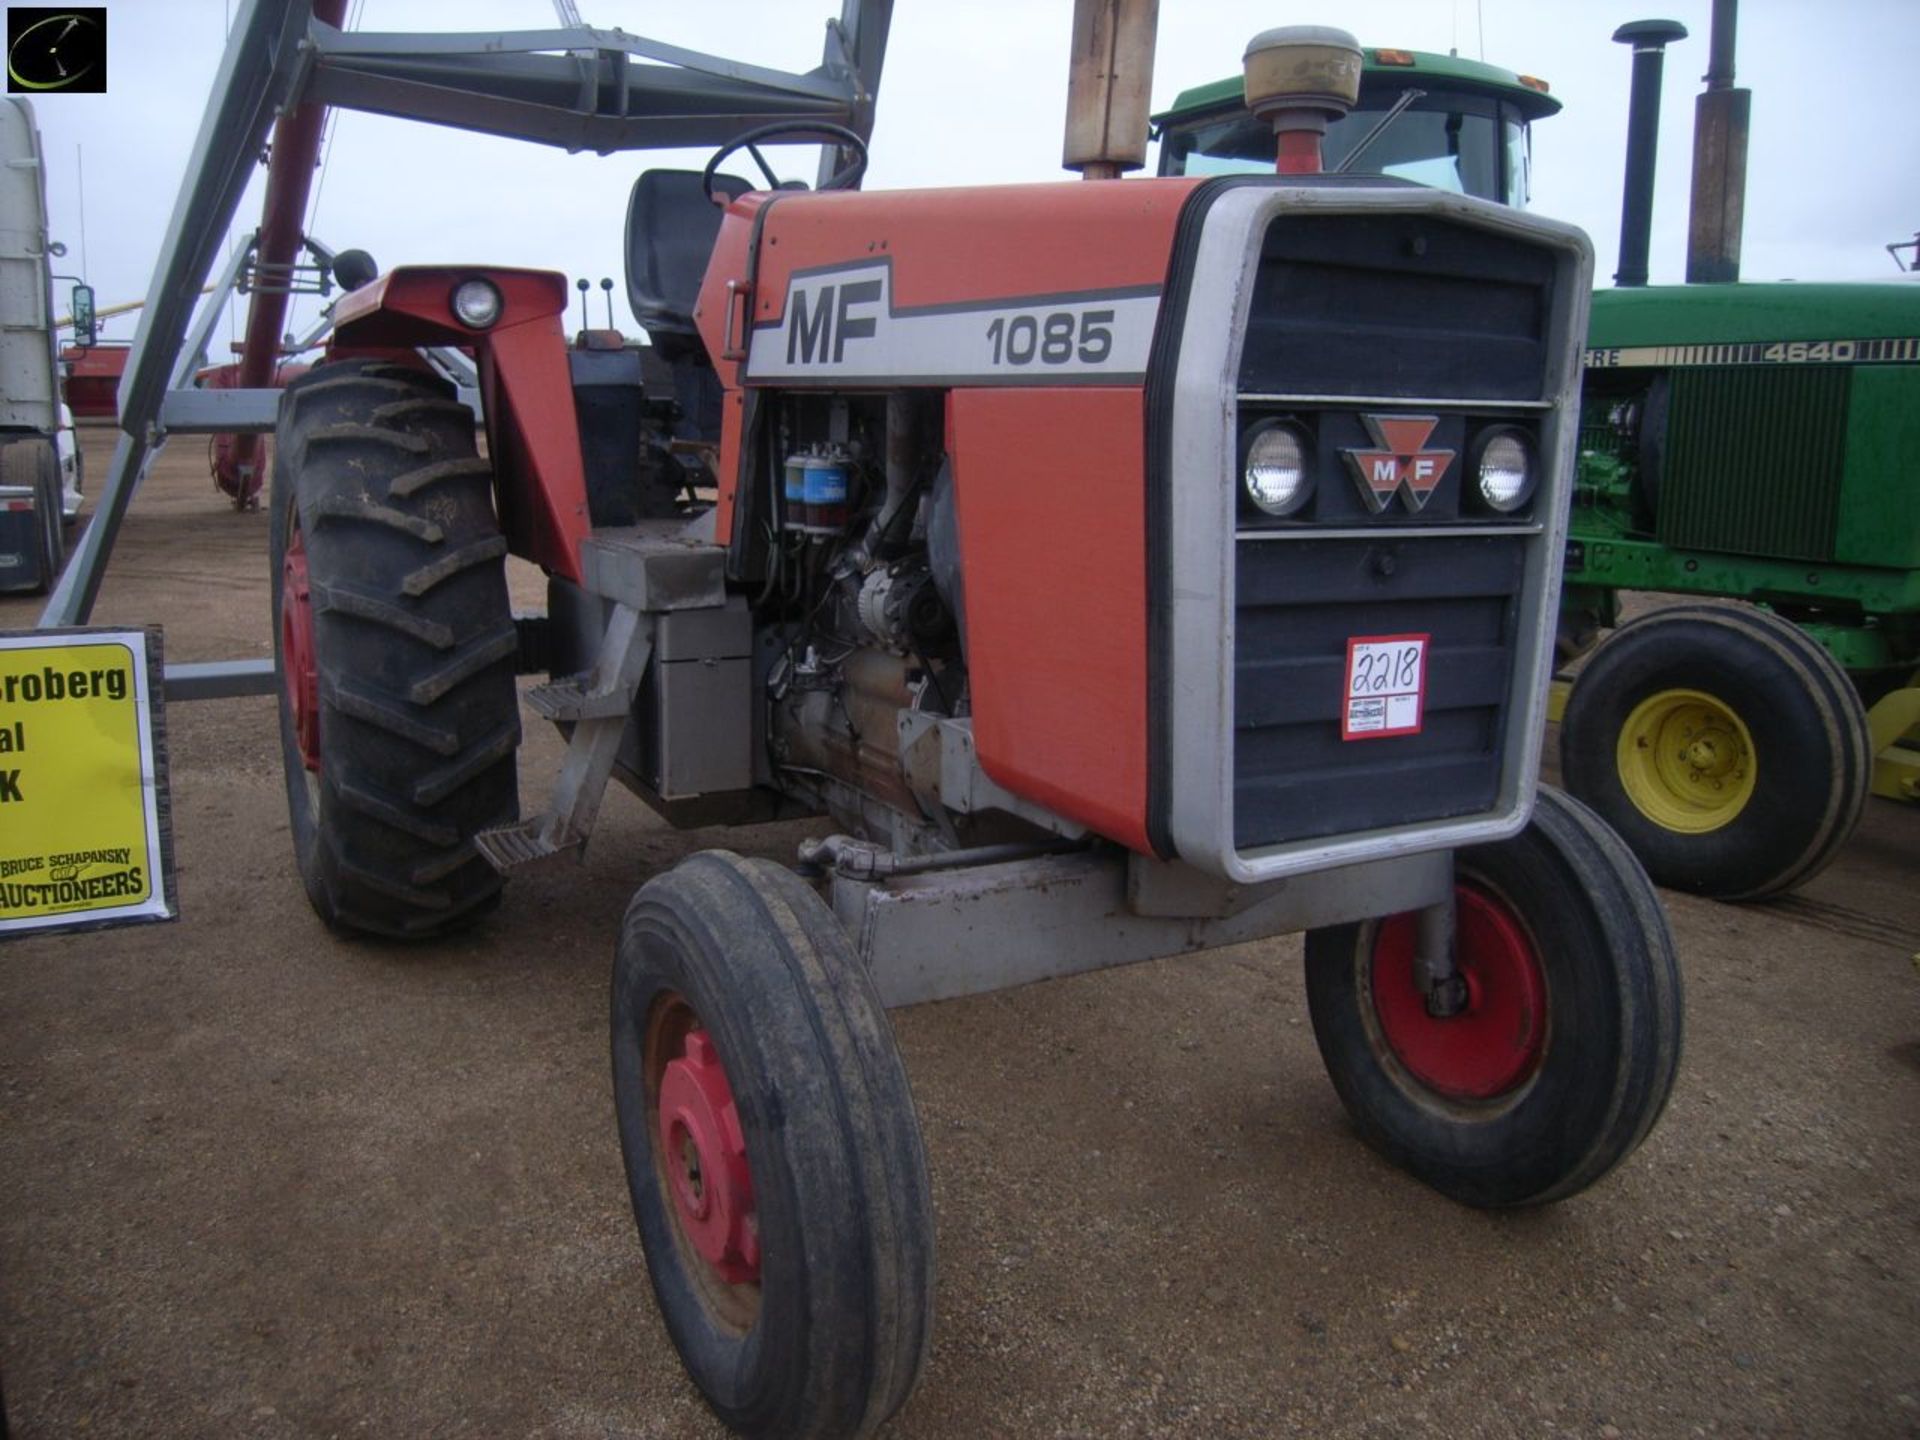 1976 MF 1085 TRACTOR, 2WD, ODO SHOWING 8650 HRS, 4 CYL ENG, 3 SPD TRANS W/ LOW & MULTI POWER, 2 - Image 6 of 6